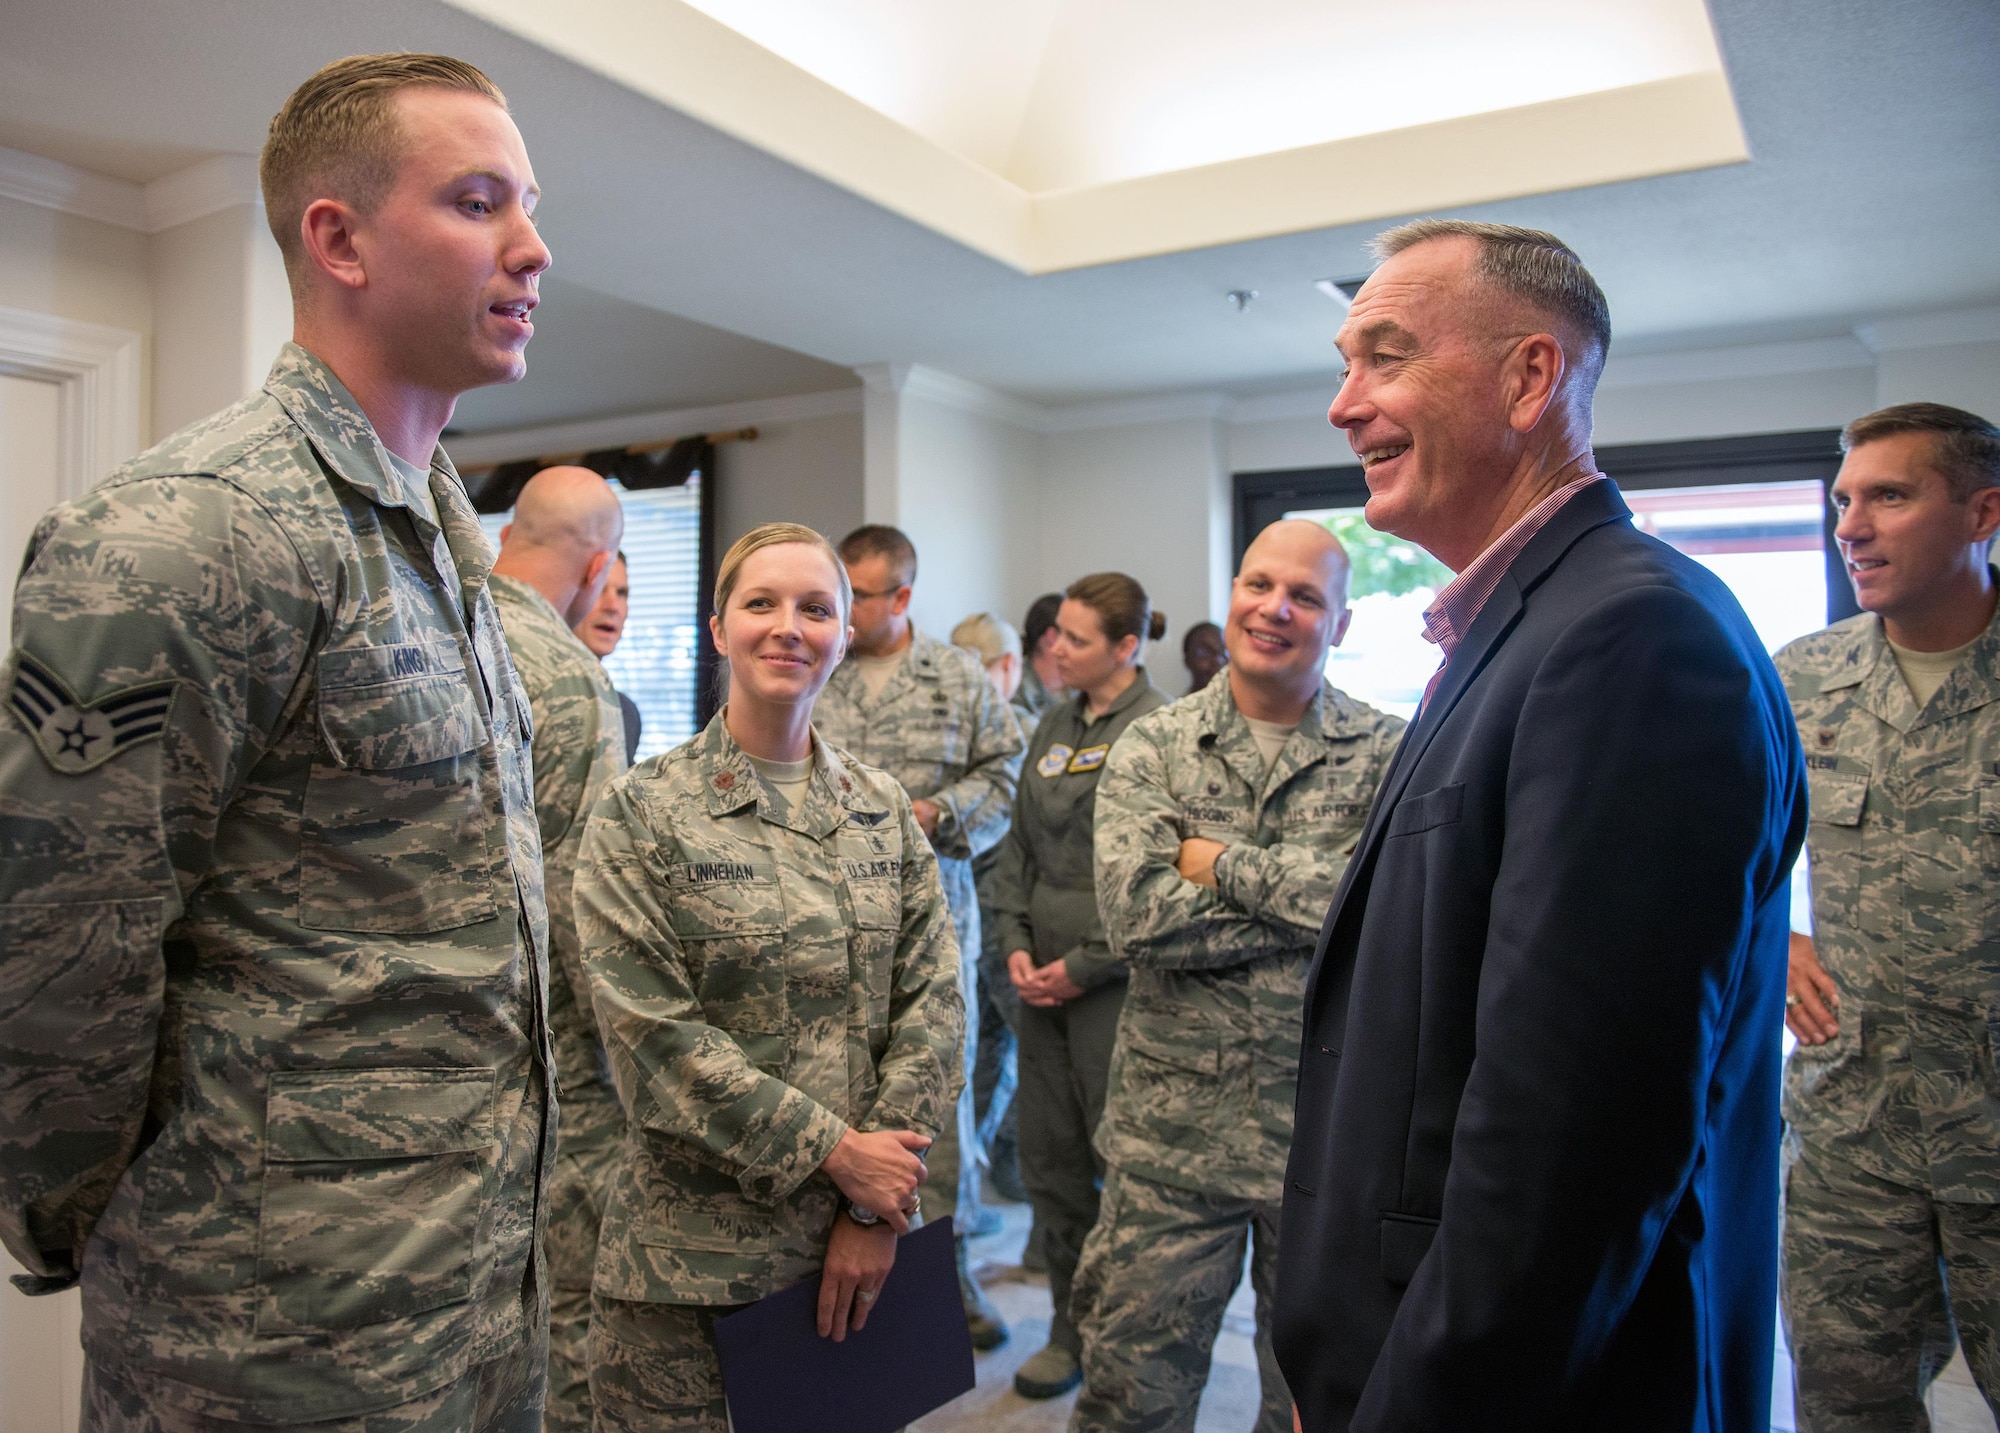 Marine Corps Gen. Joseph F. Dunford Jr., Chairman of the Joint Chiefs of Staff, arrives at Travis Air Force Base, Calif., during a gas and go, August, 10, 2017. (U.S. Air Force photo by Louis Briscese)